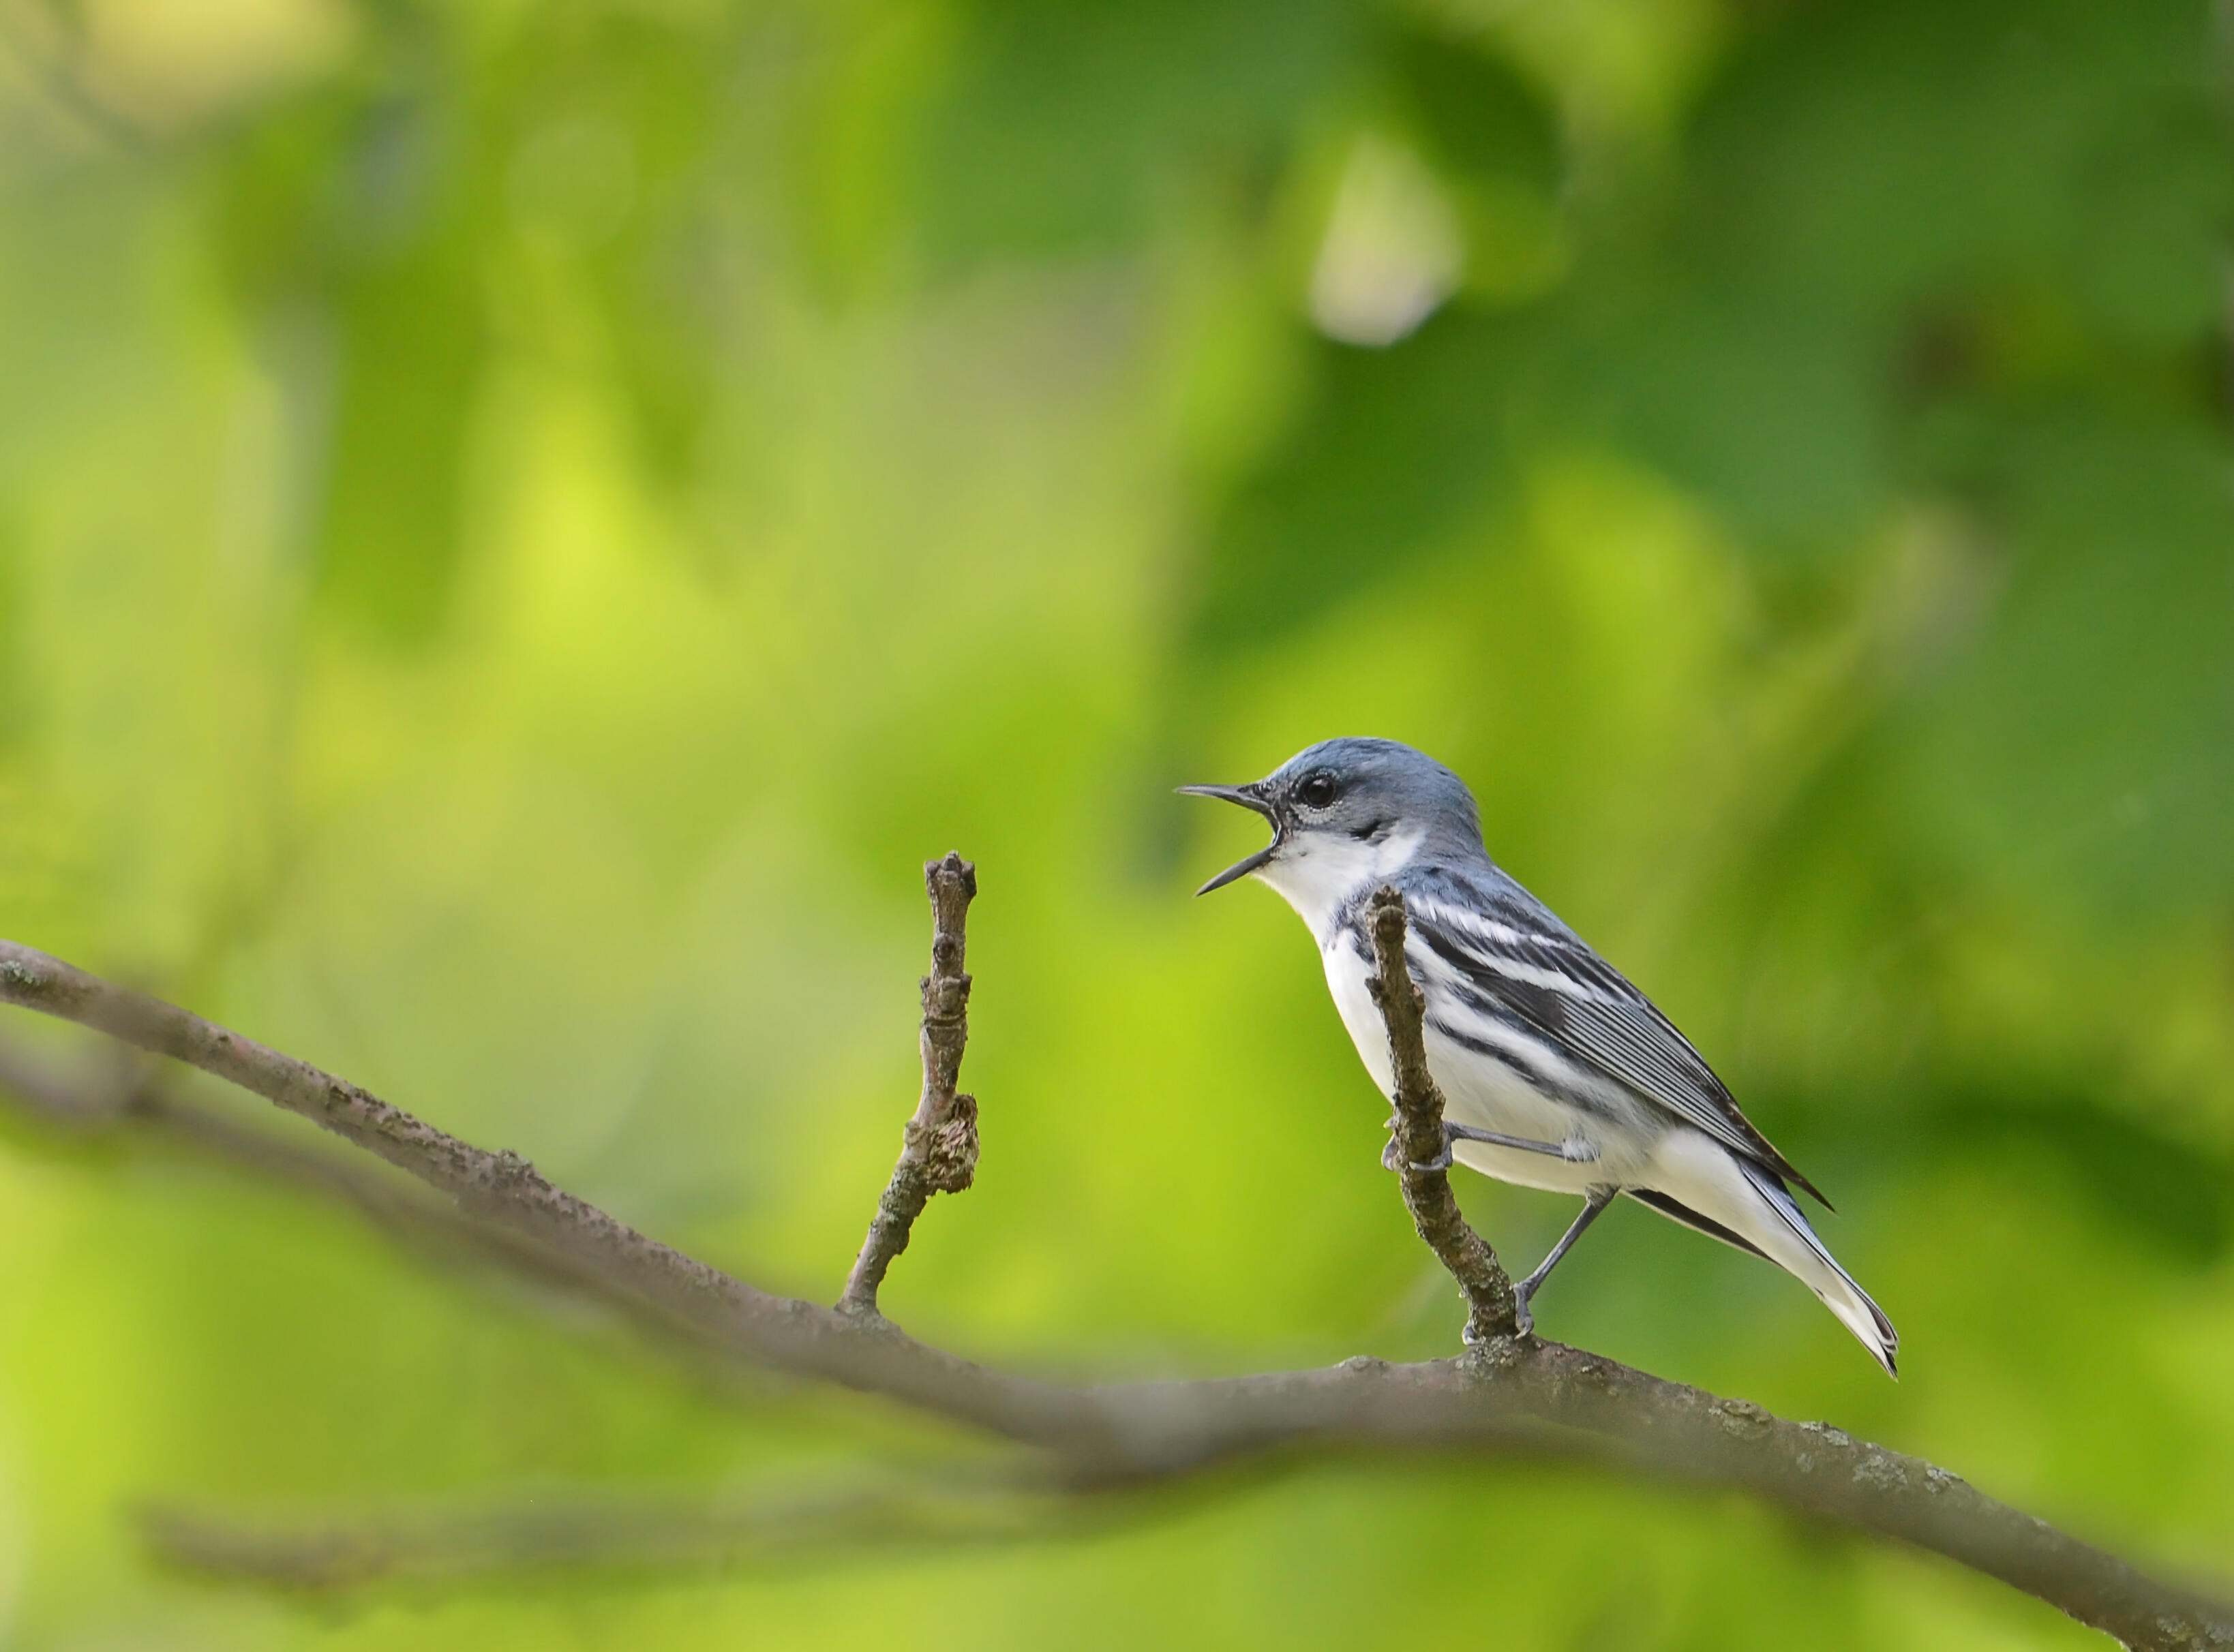 A male cerulean warbler singing in a tree.